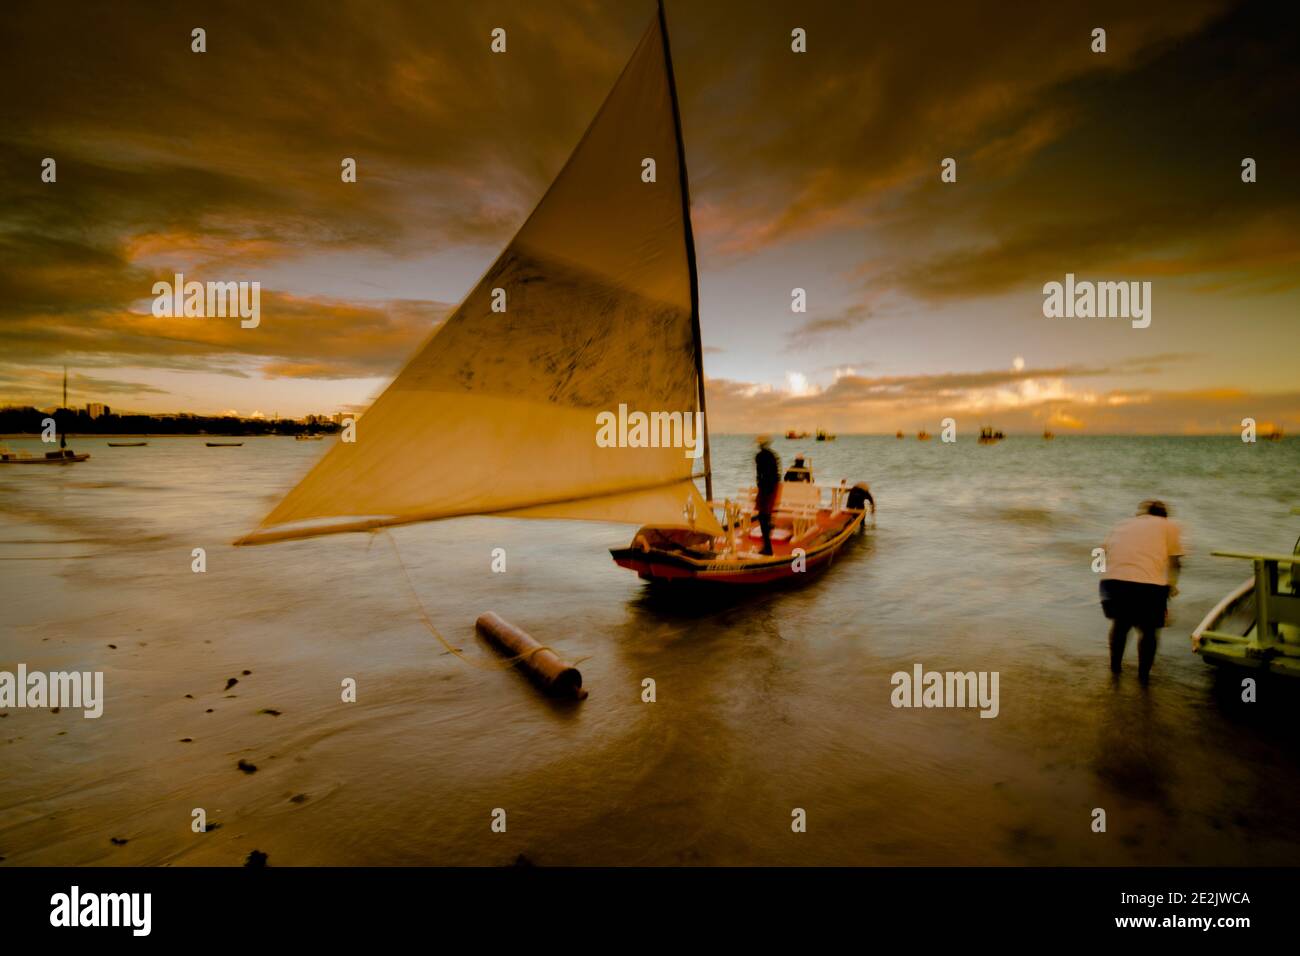 Sunset and tourist boats on a beach in Maceió, Brazil Stock Photo